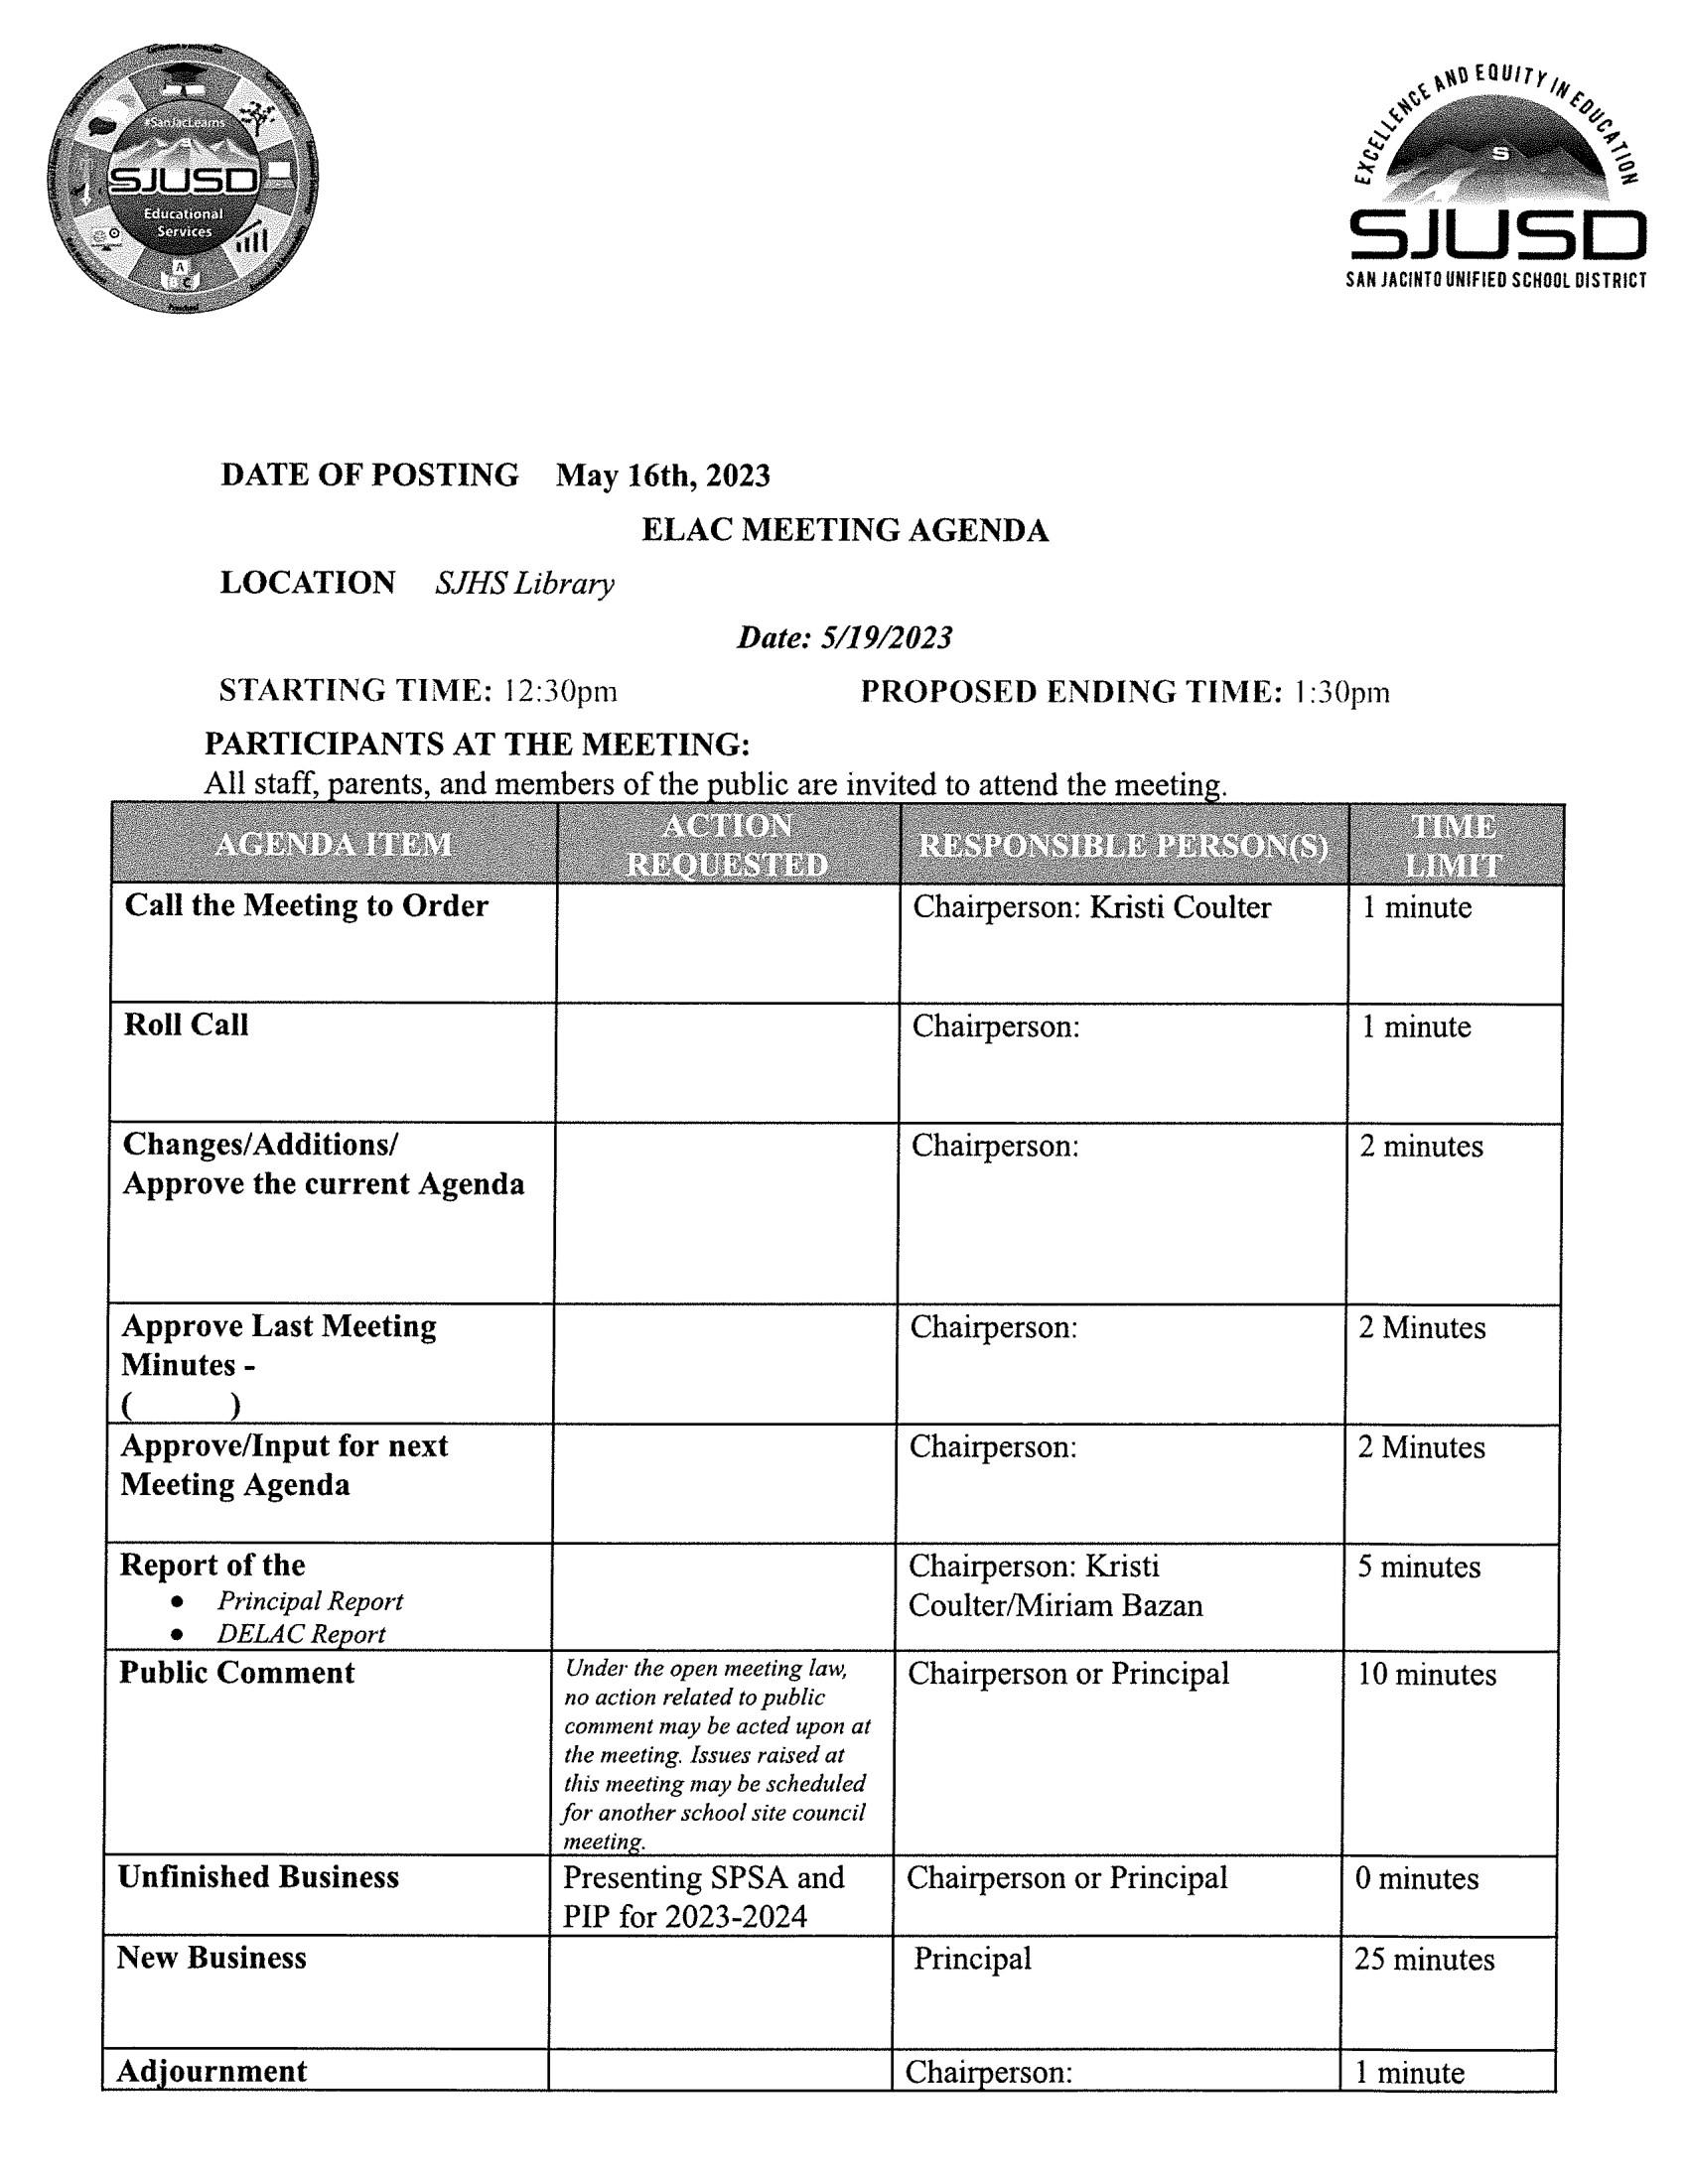 ELAC Agenda for May 19th 2022-2023 